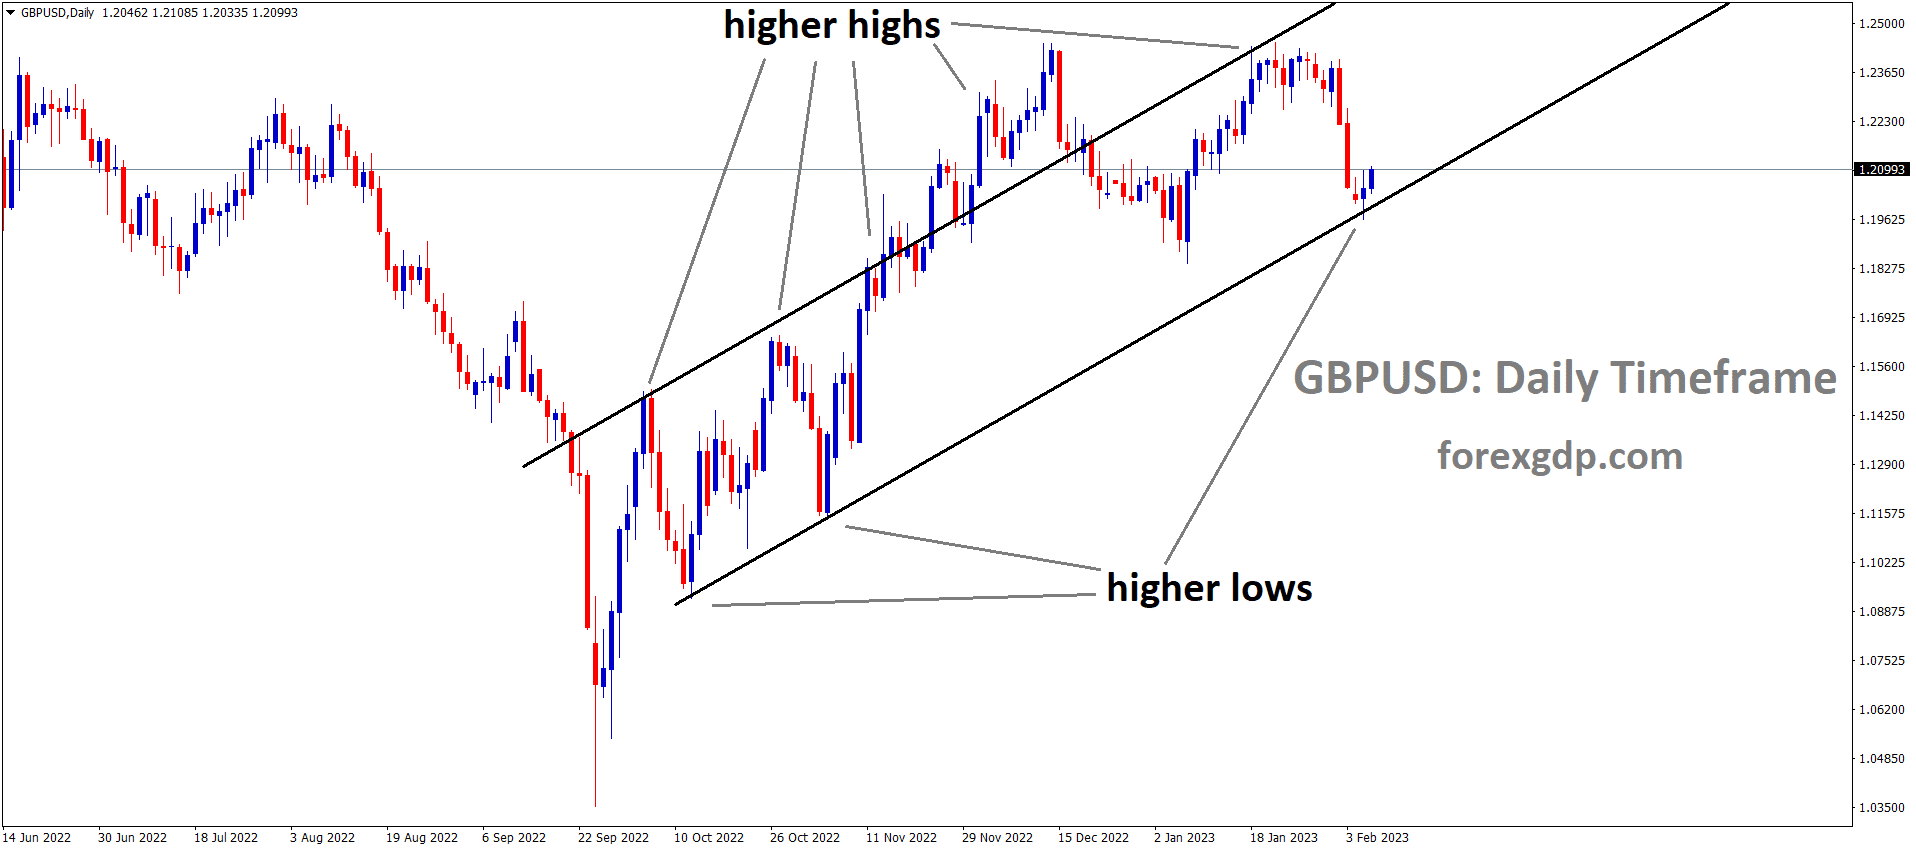 GBPUSD is moving in an Ascending channel and the market has rebounded from the higher low area of the channel